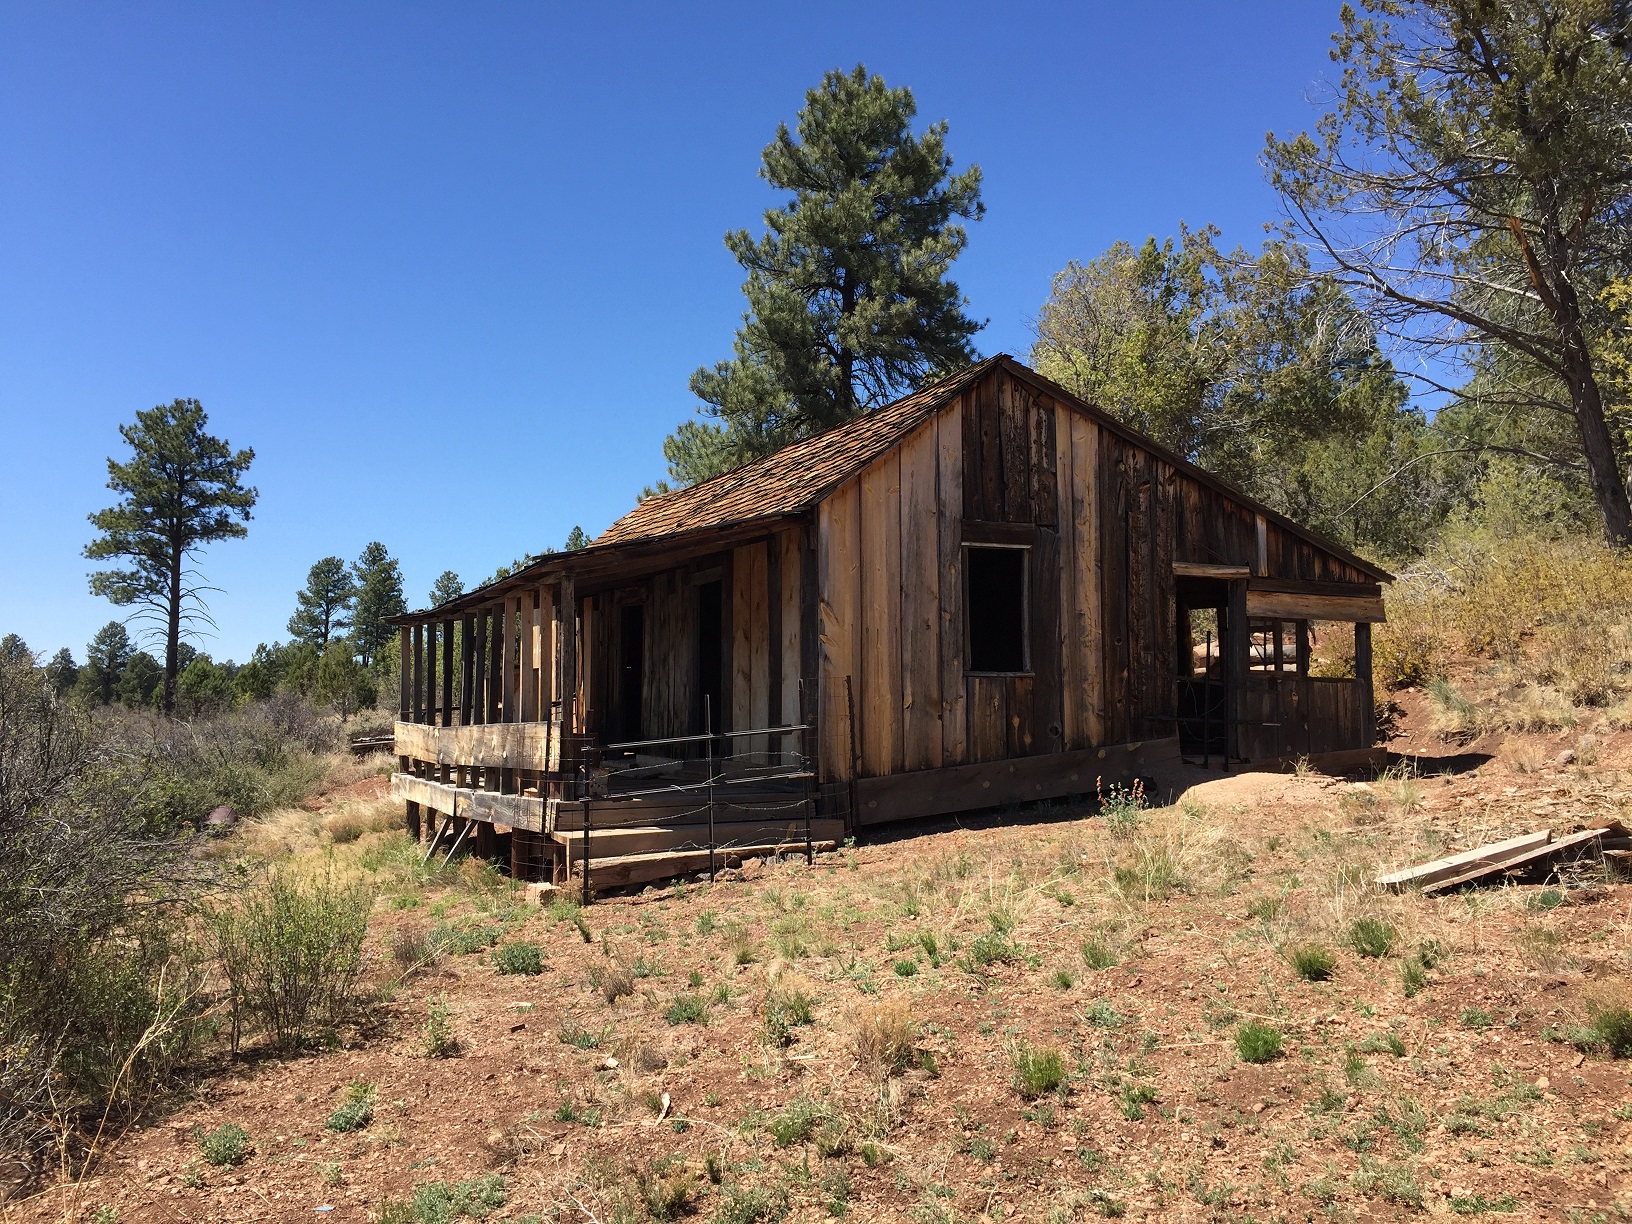 The right side of the Pine Cabin on the Arizona Strip